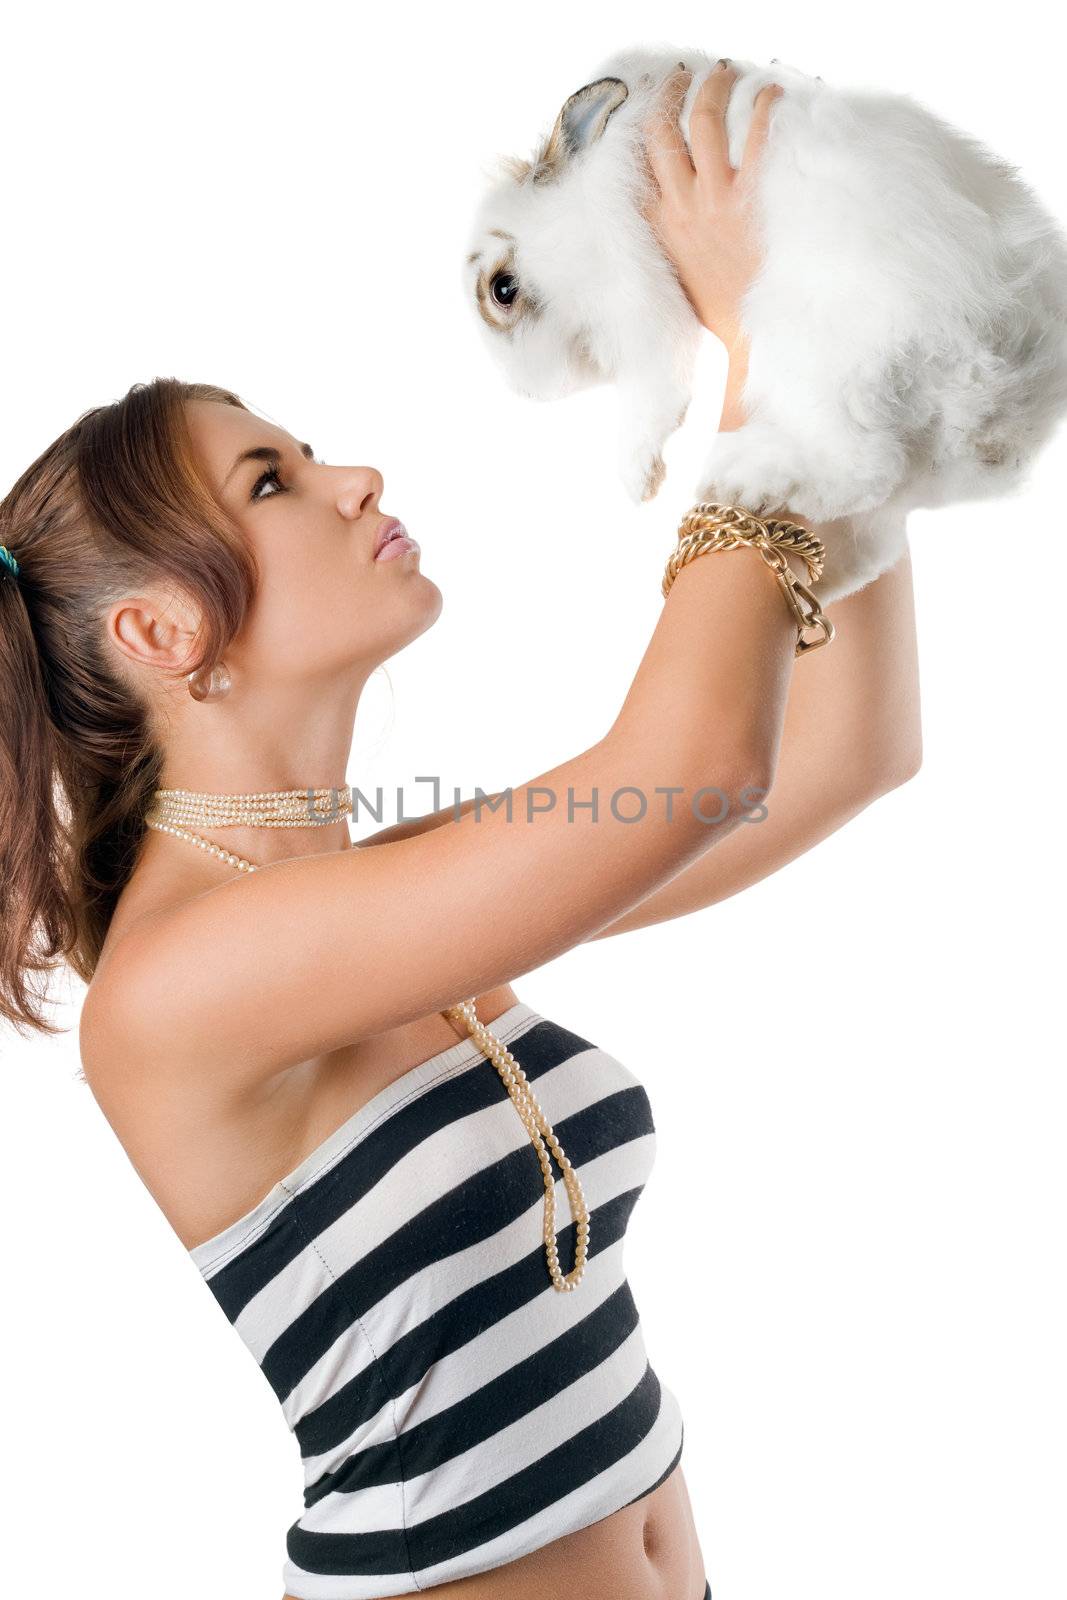 Pretty young woman playing with rabbit. Isolated